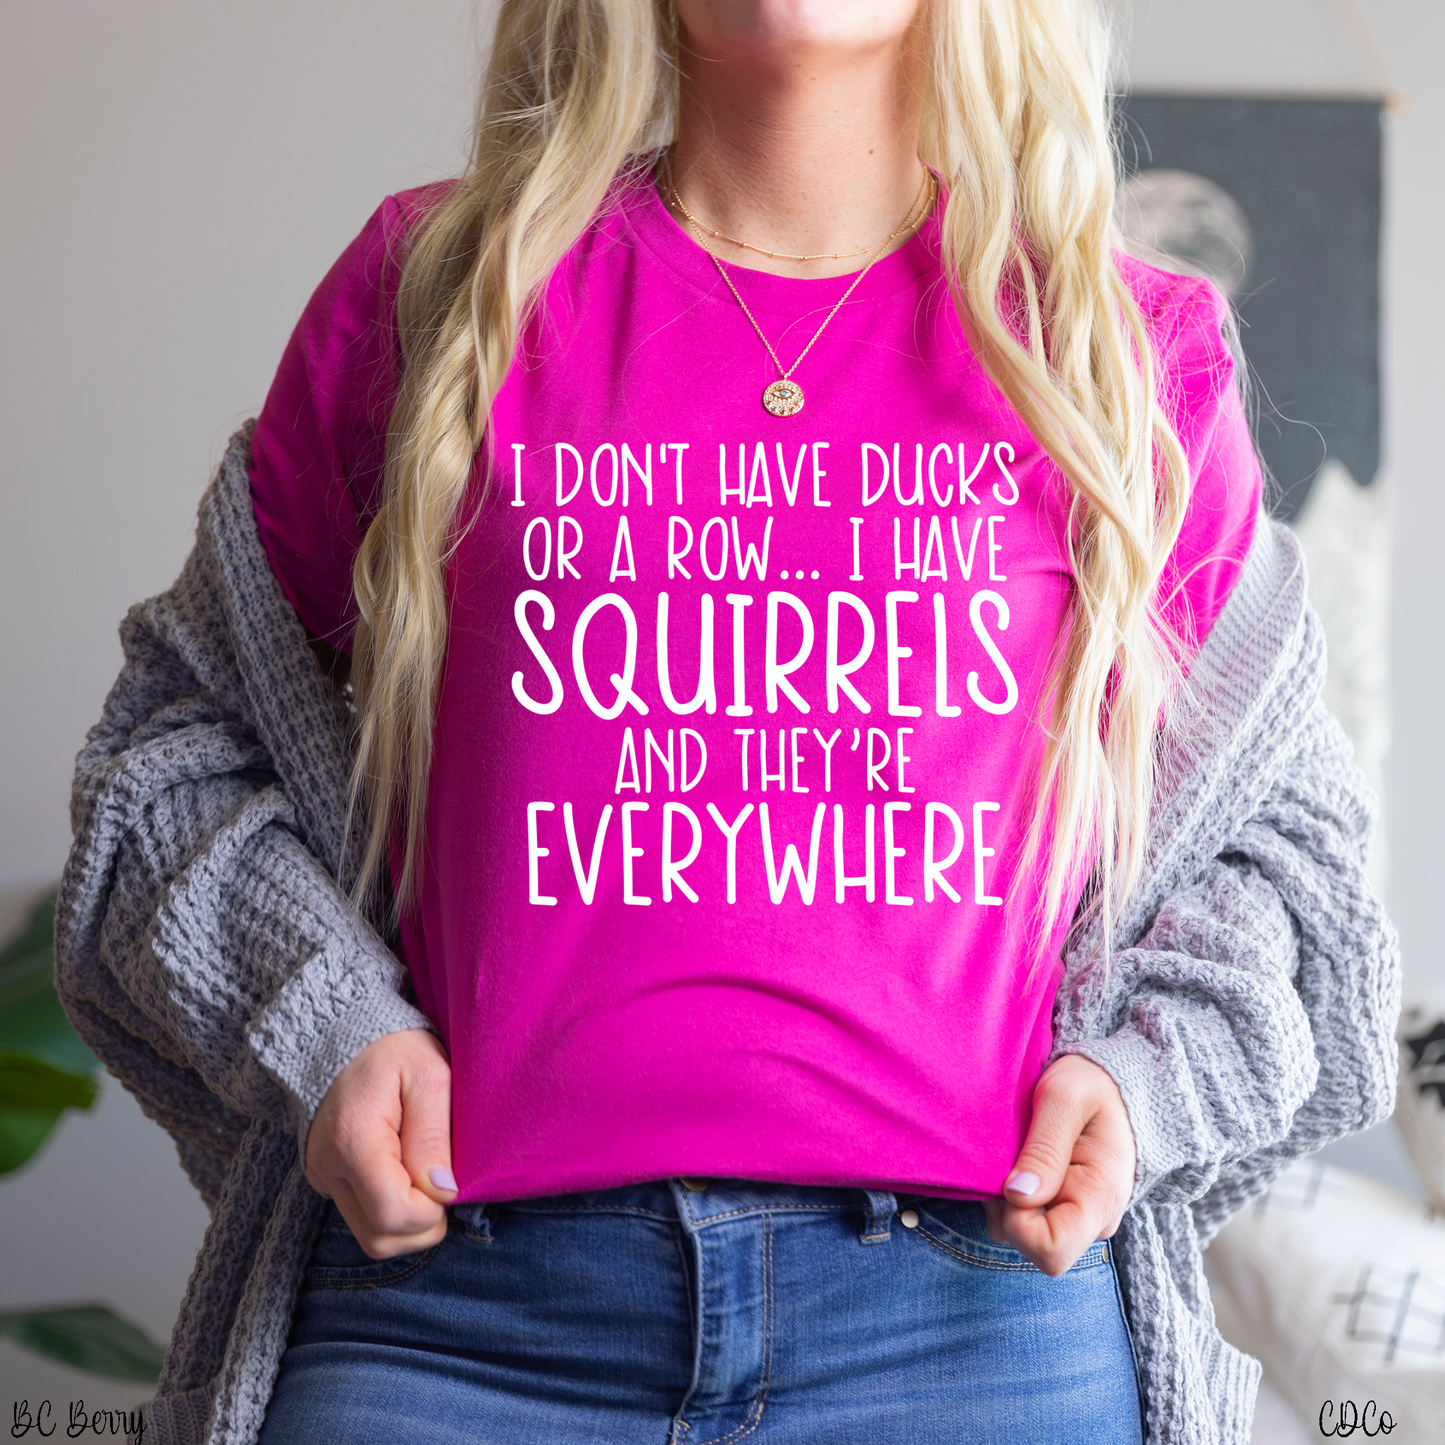 I Don't Have Ducks or a Row I Have Squirrels and They're Everywhere (325°)